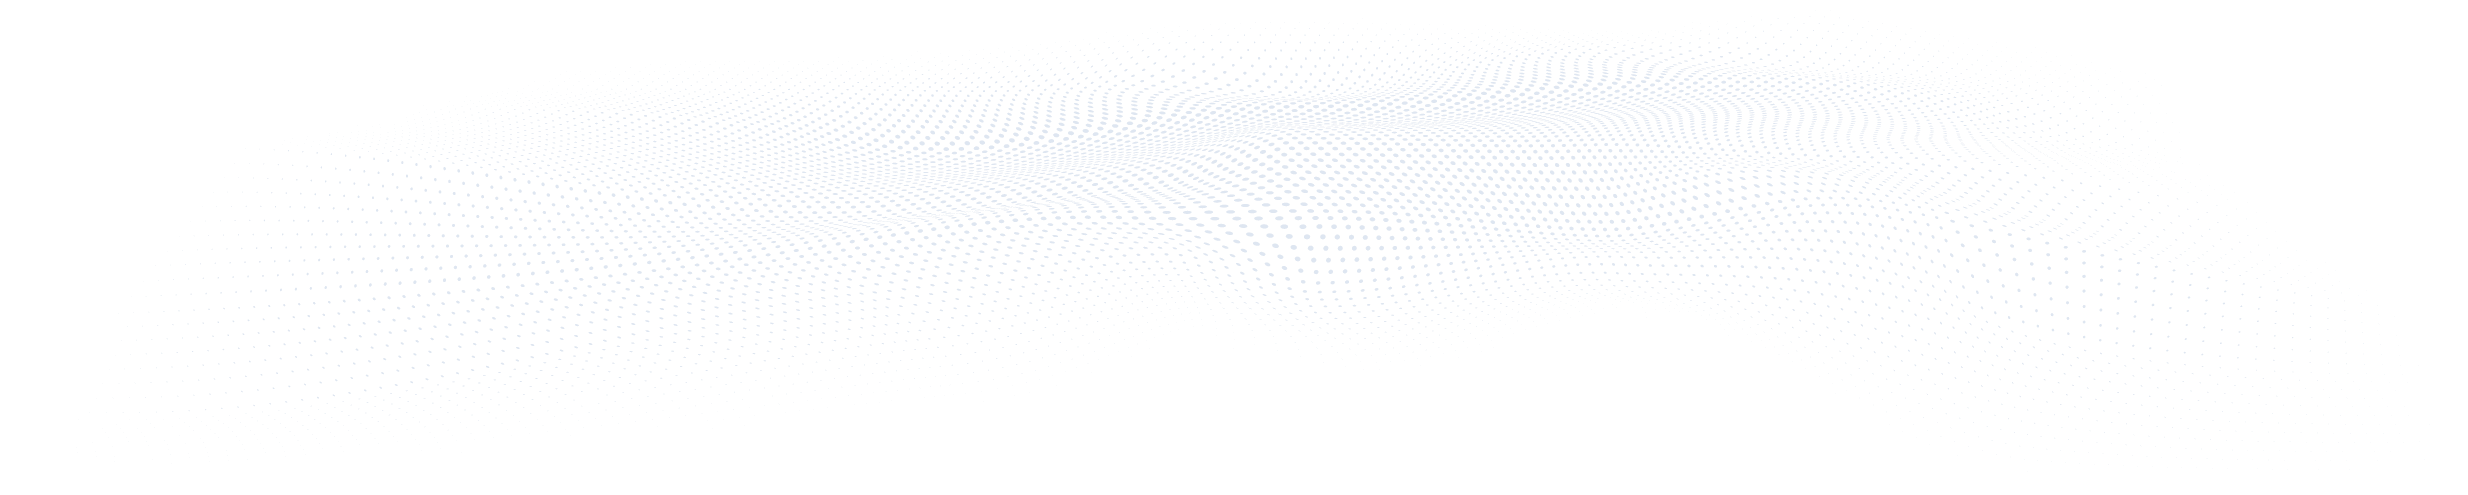 A wave made of particles, a very cool background image